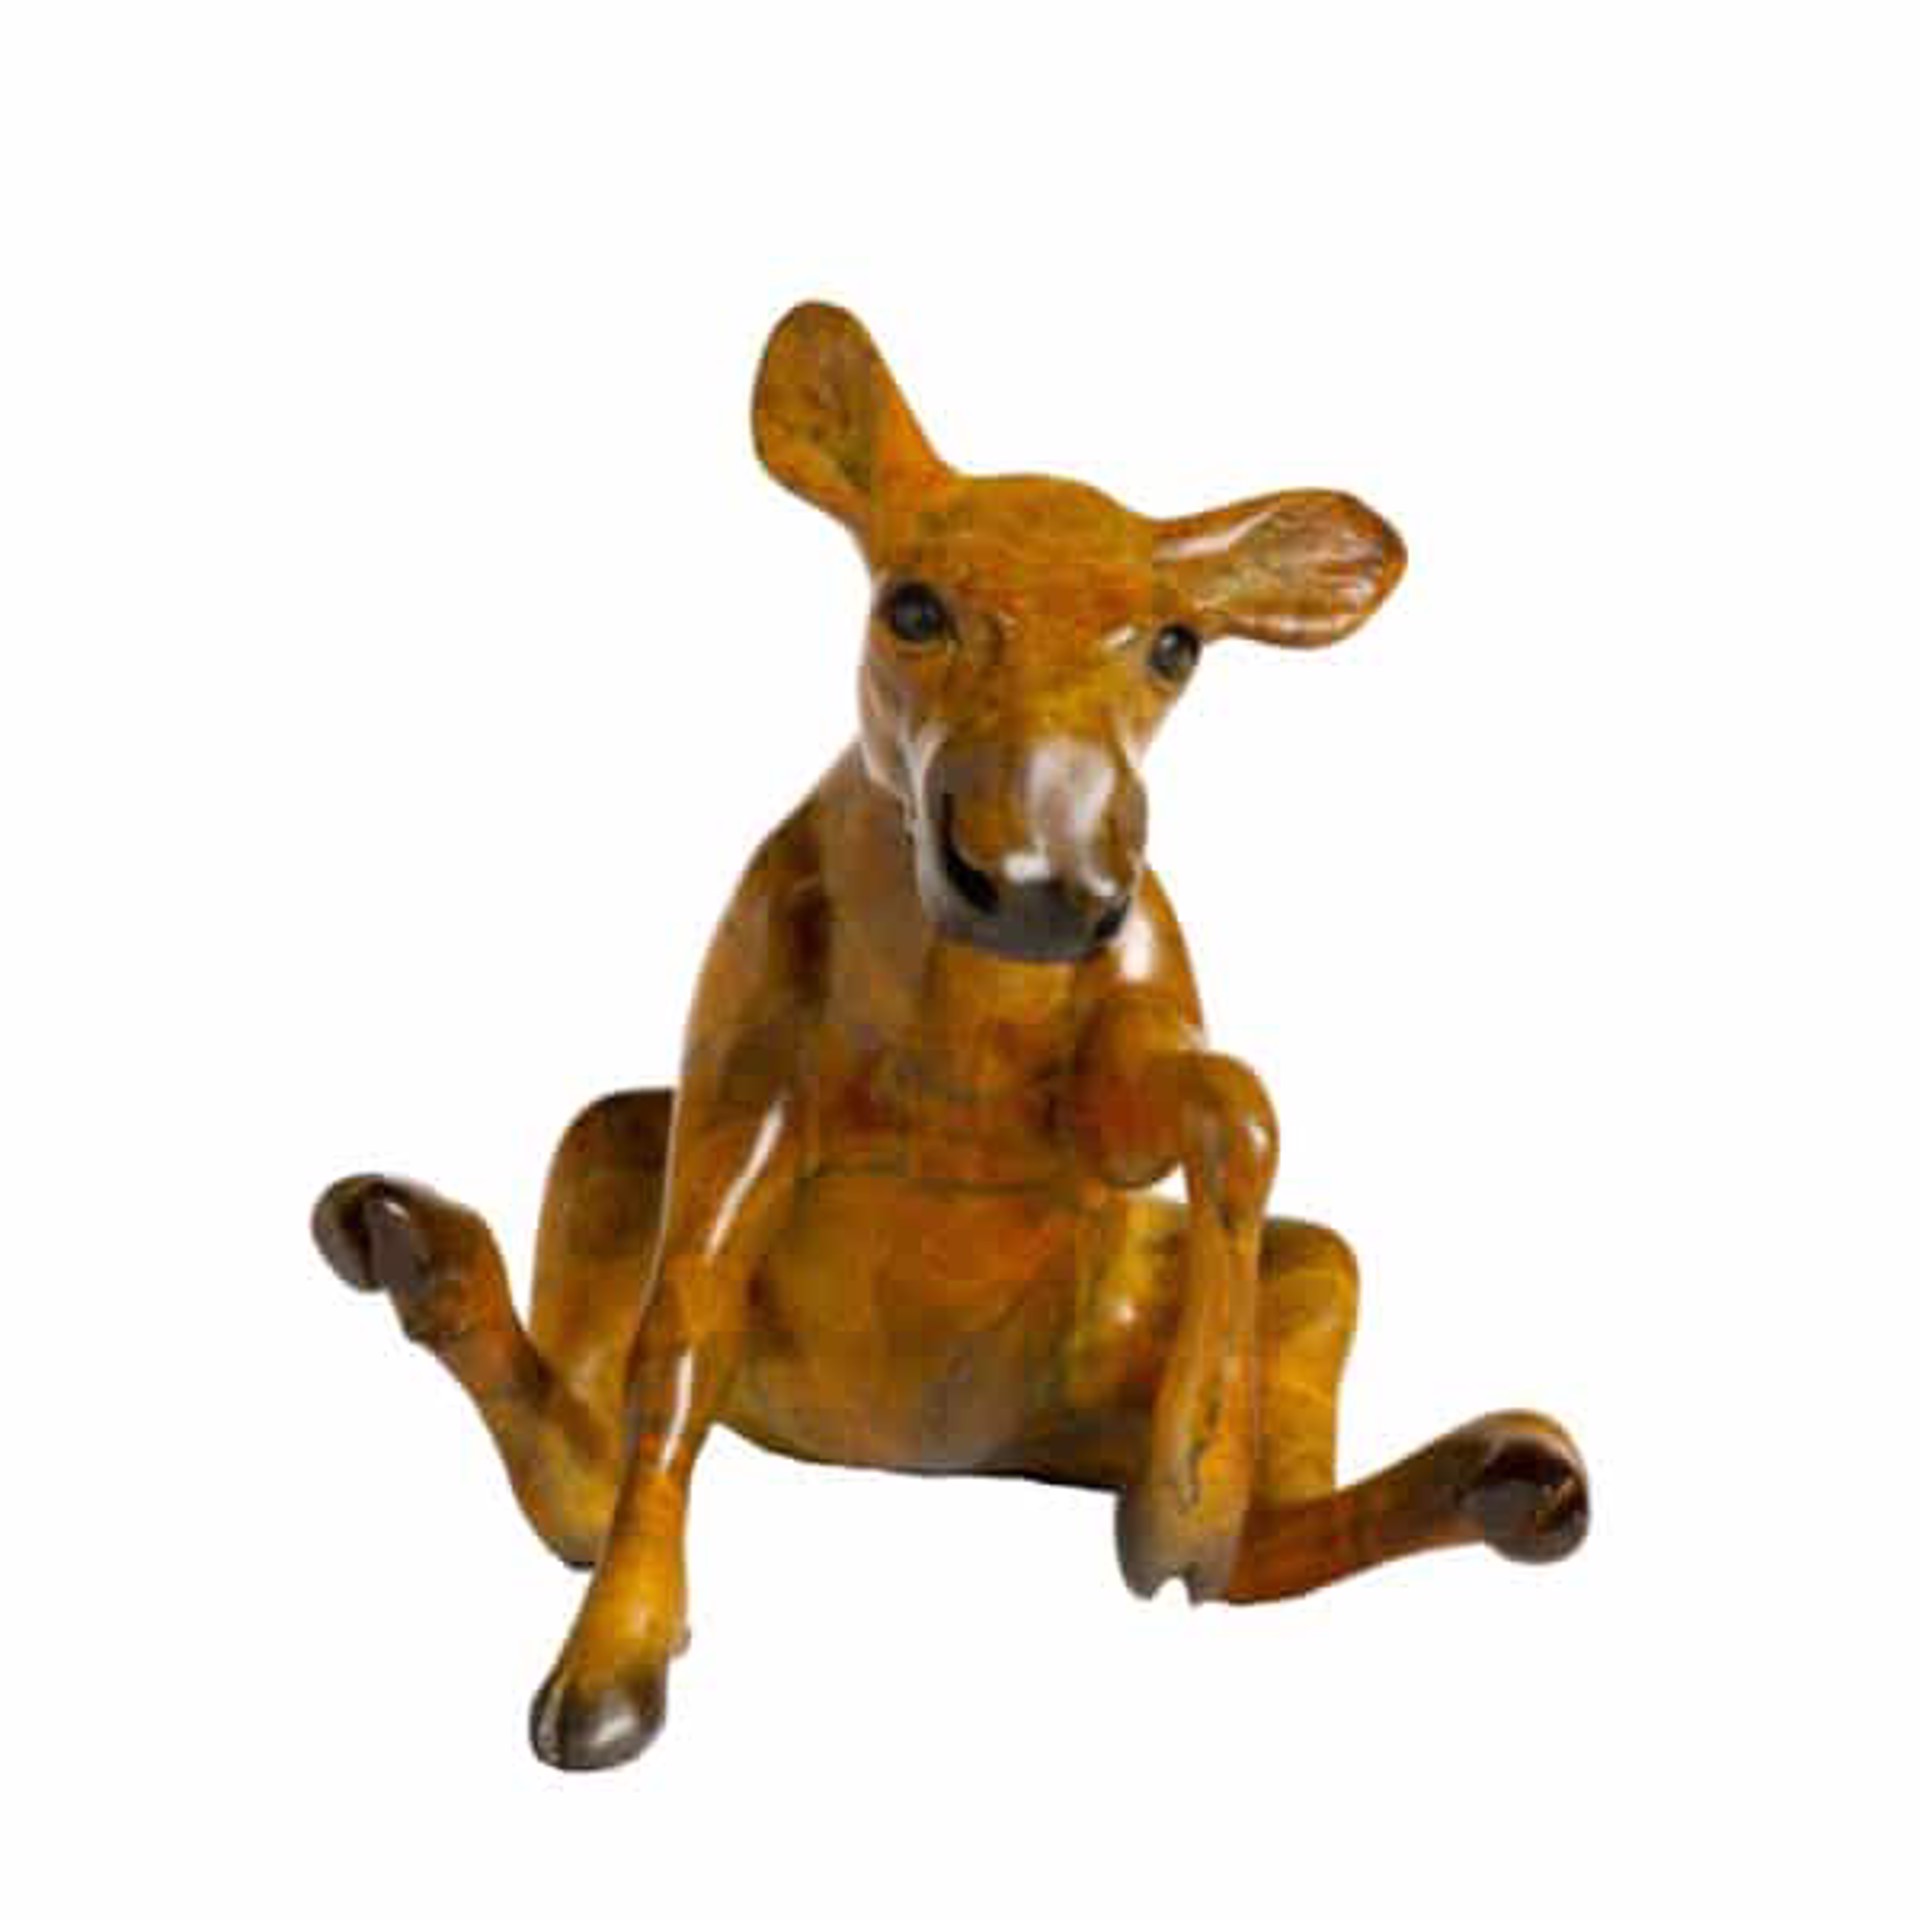 A Bronze Baby Moose Calf Sitting With A Glossy Contemporary Patina, By Alison Caswell 